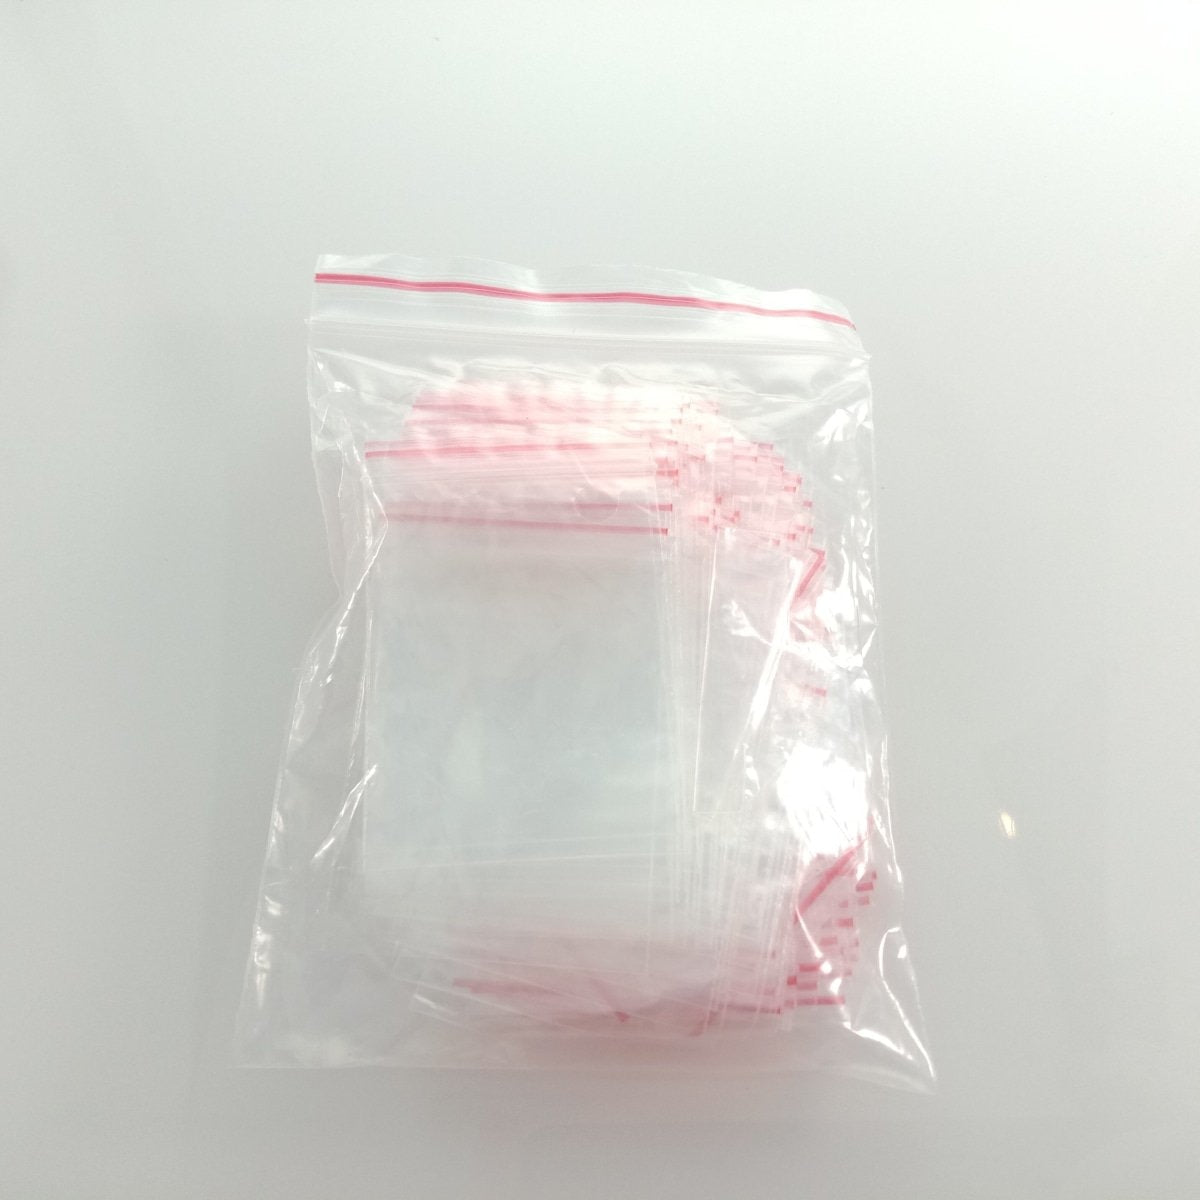 100pcs Clipseal Satchels 4x6cm Small Plastic Zip Bags Thin - Asia Sell